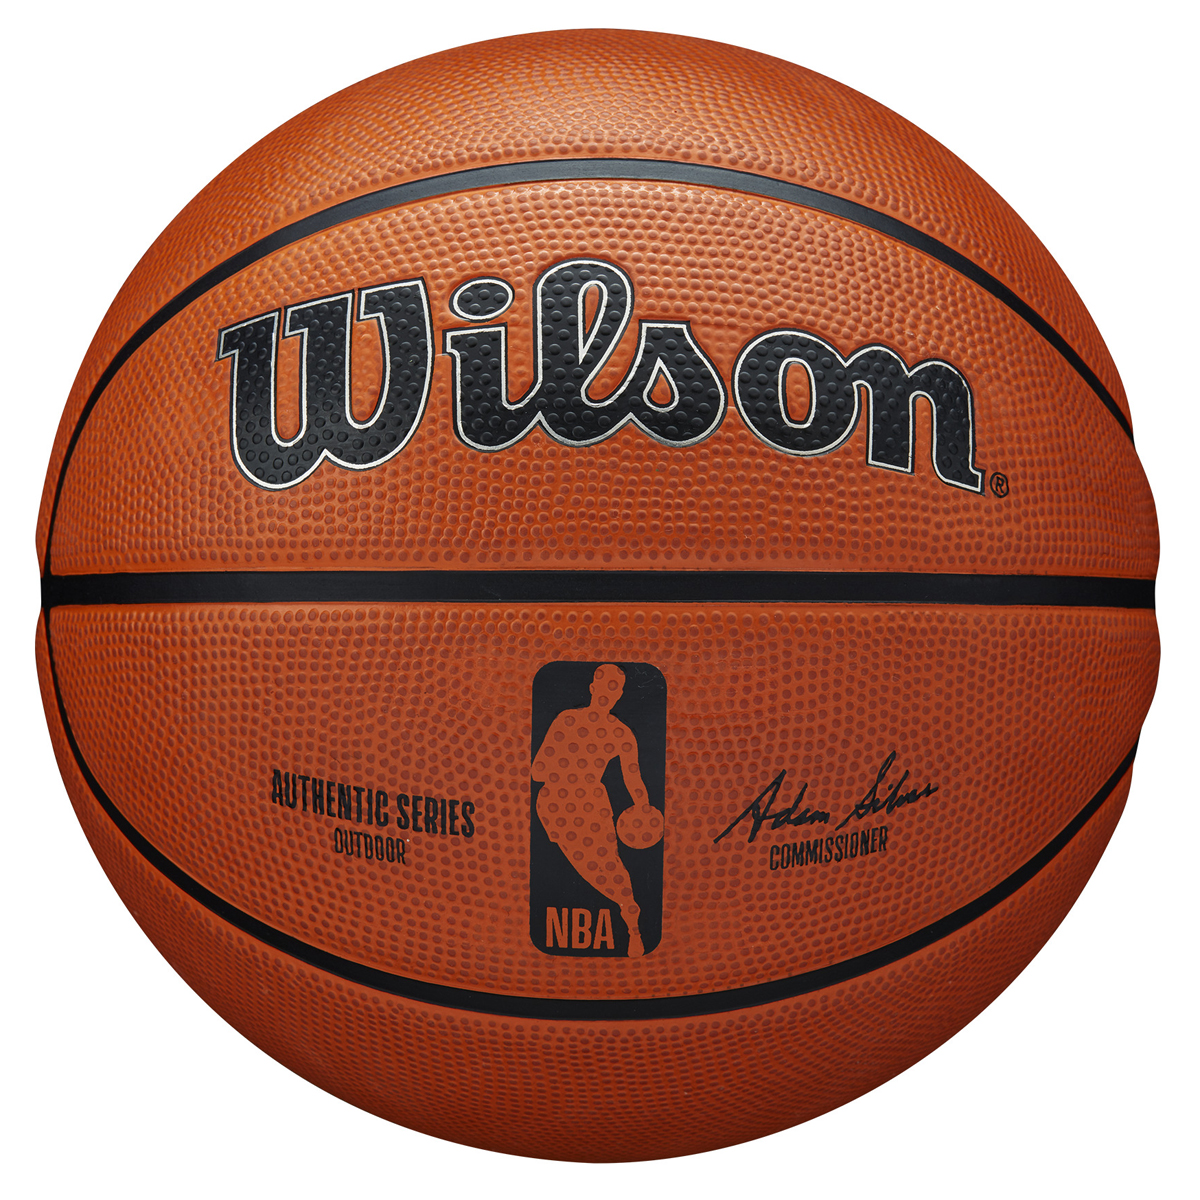 Wilson Nba Authentic Series Outdoor Basketball, Brown